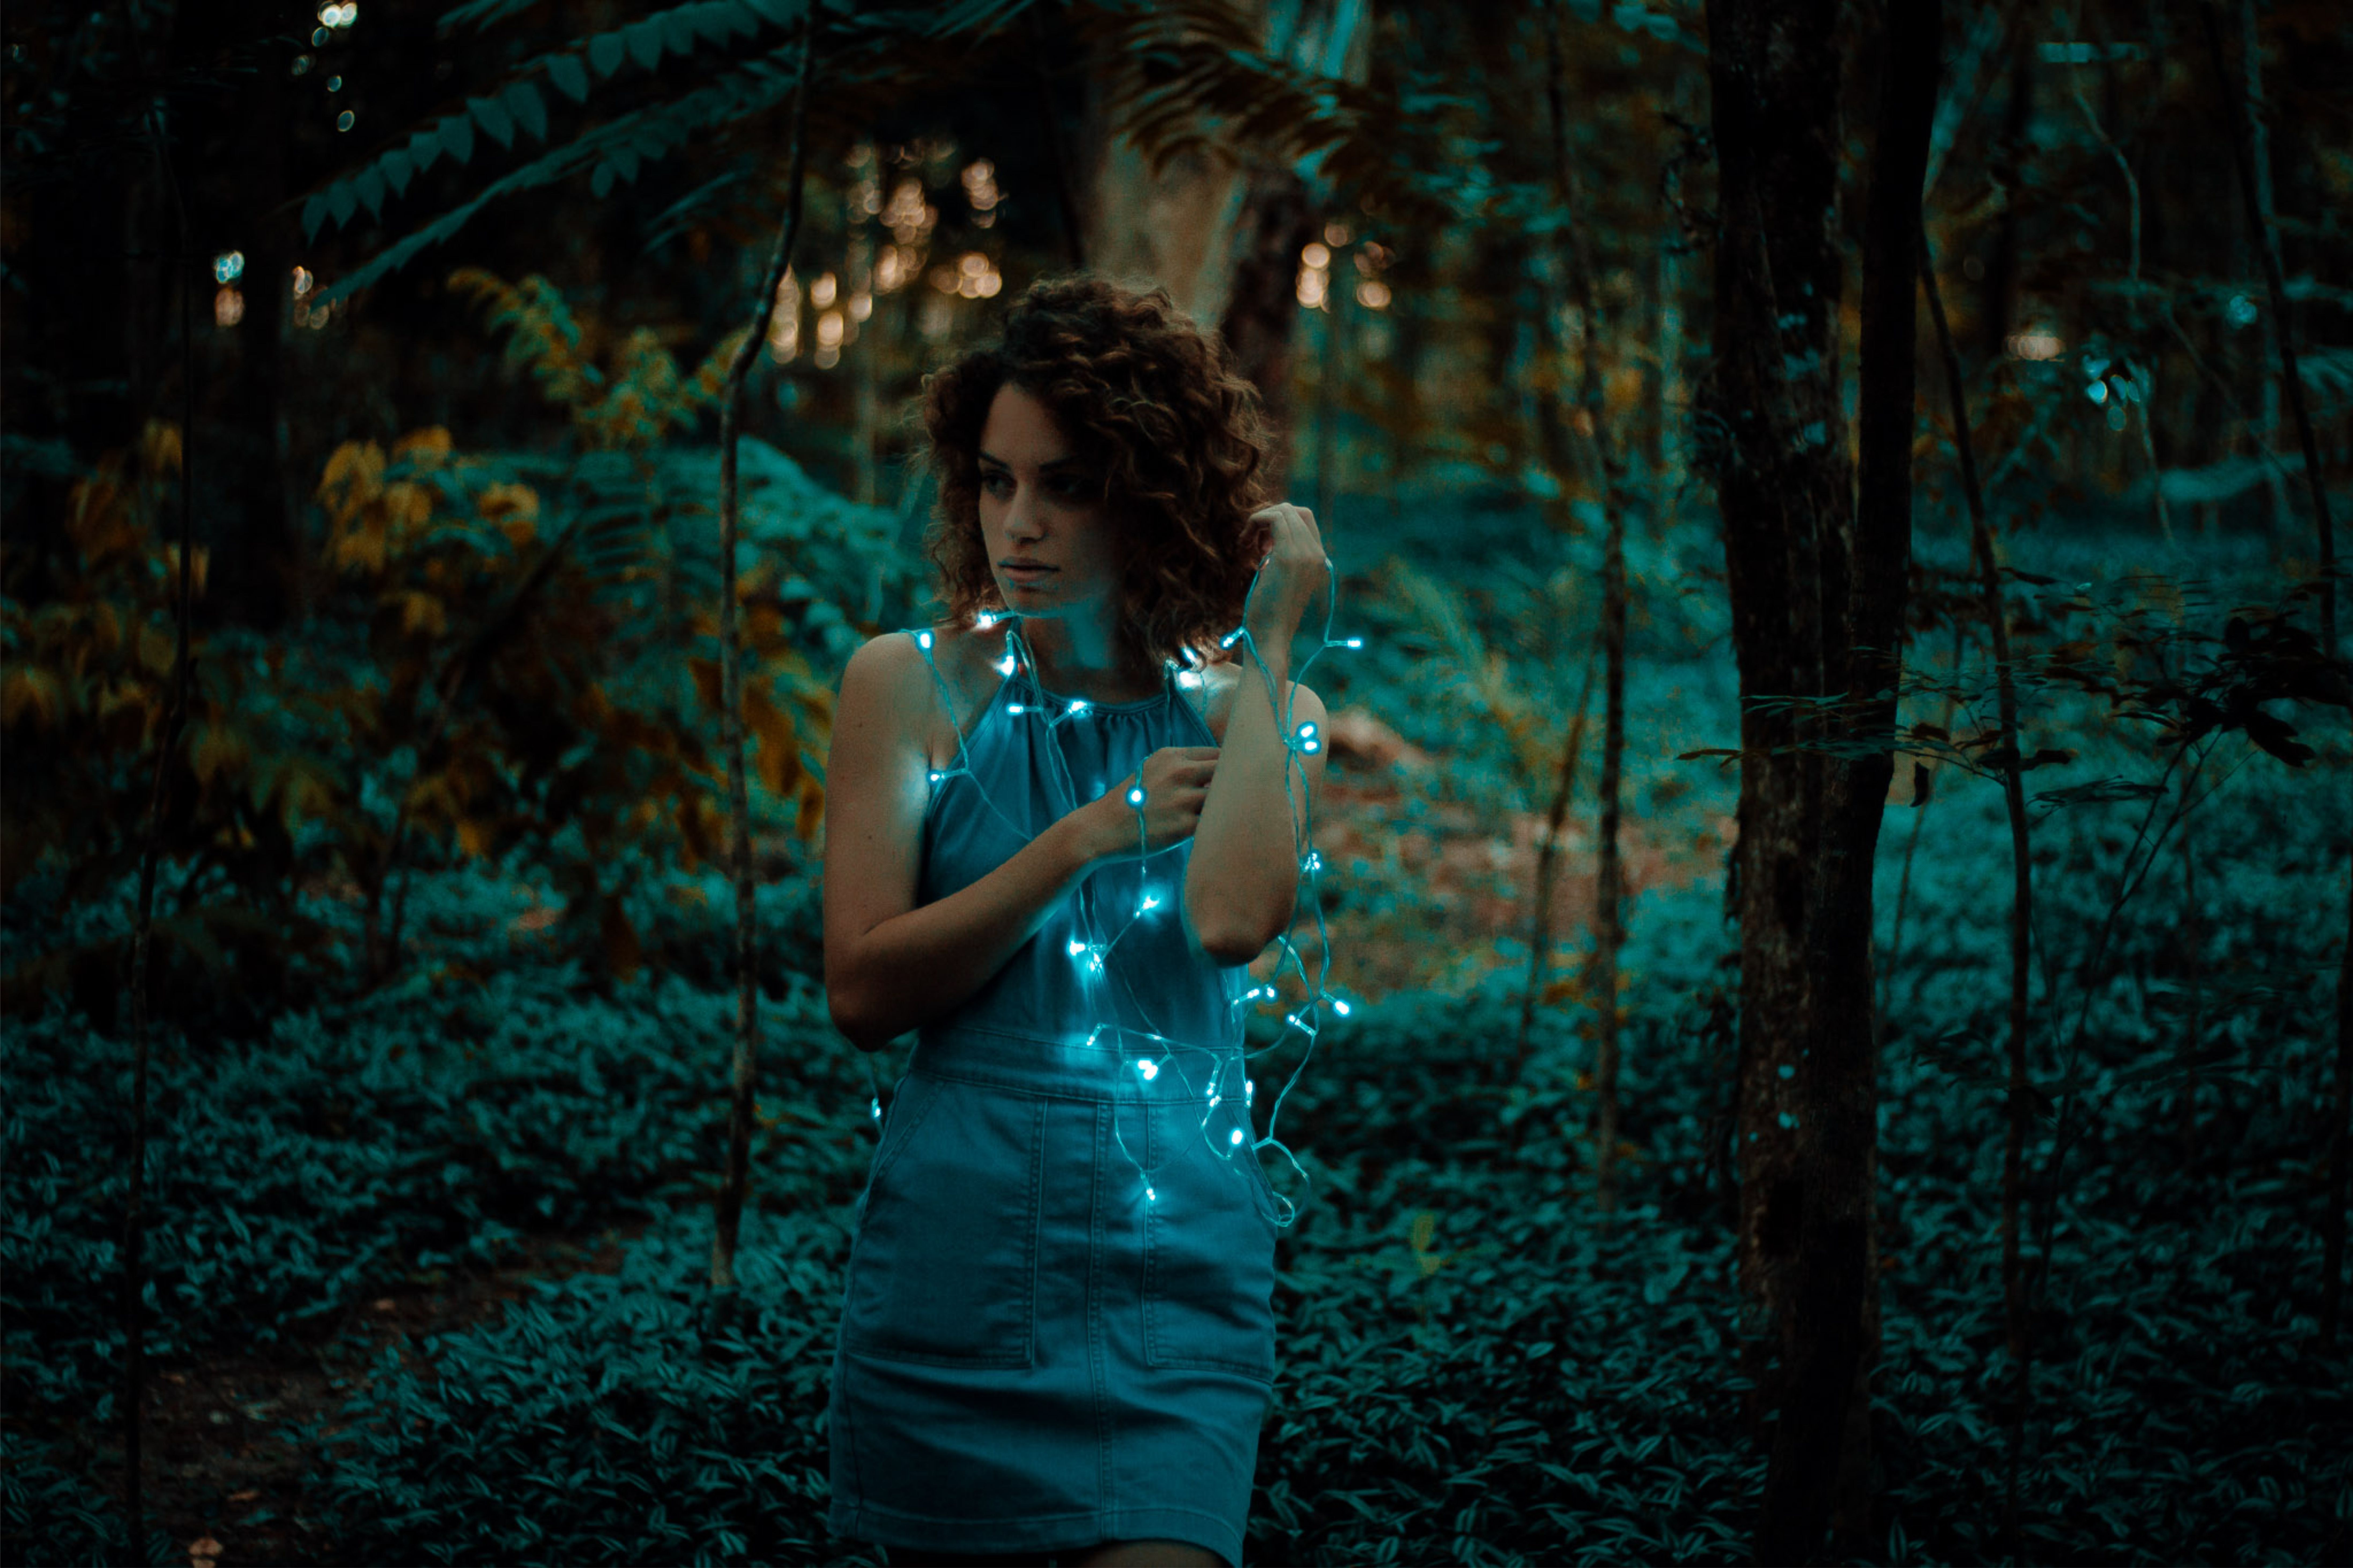 woman standing near forest with string lights on body